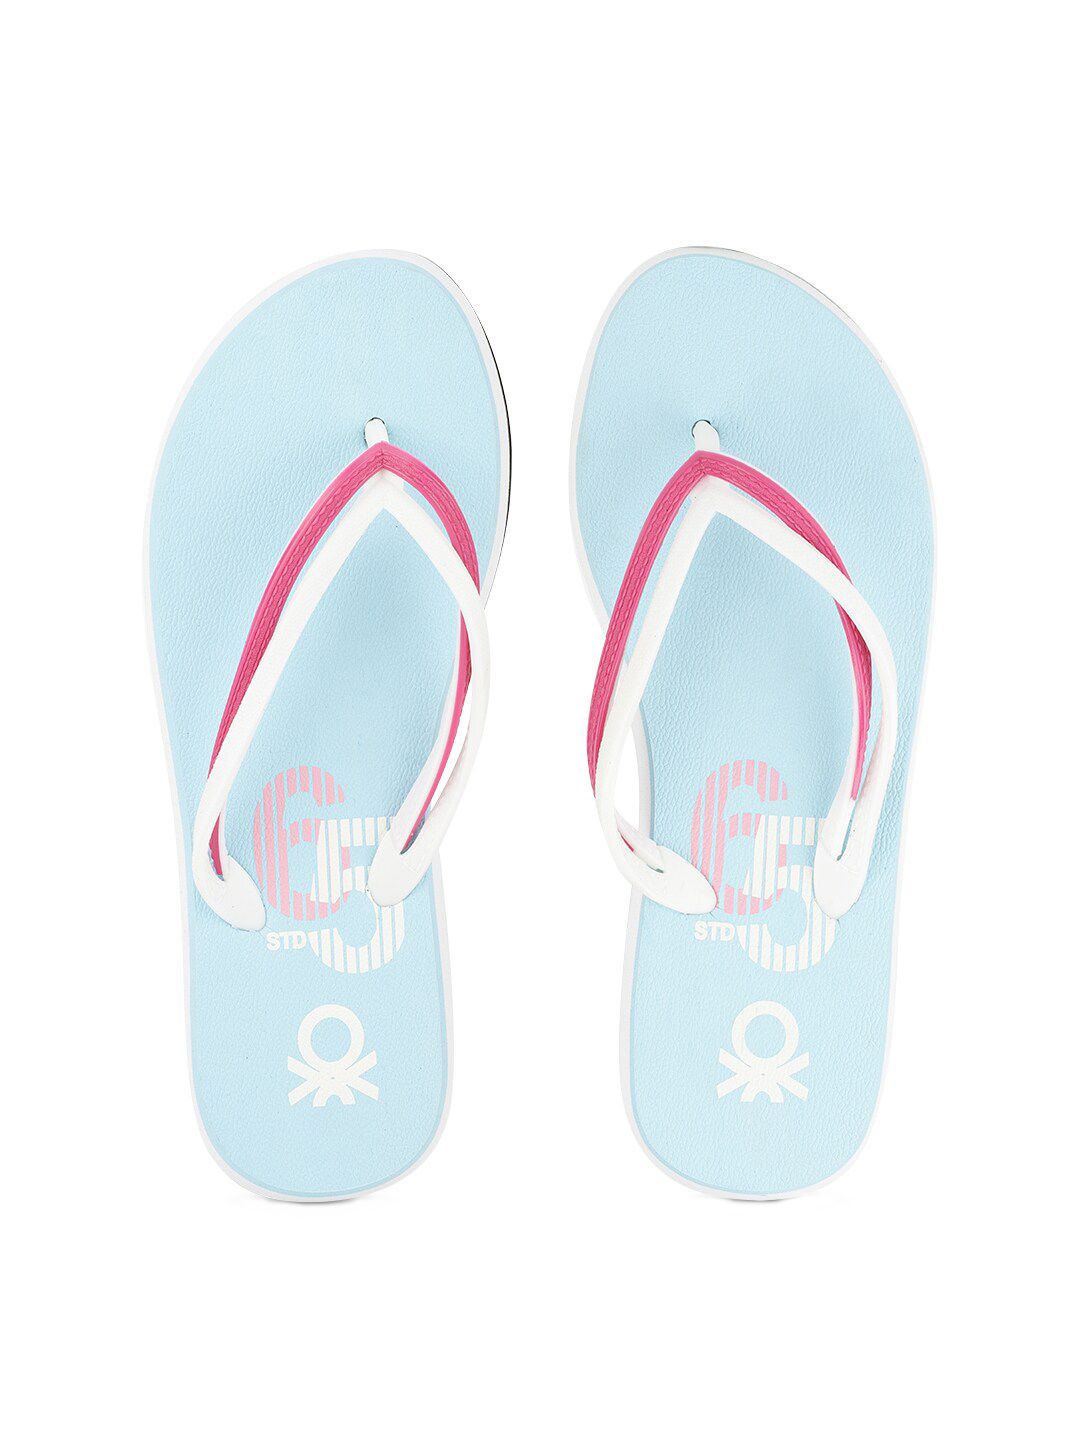 United Colors of Benetton Women Blue Printed Rubber Thong Flip-Flops Price in India